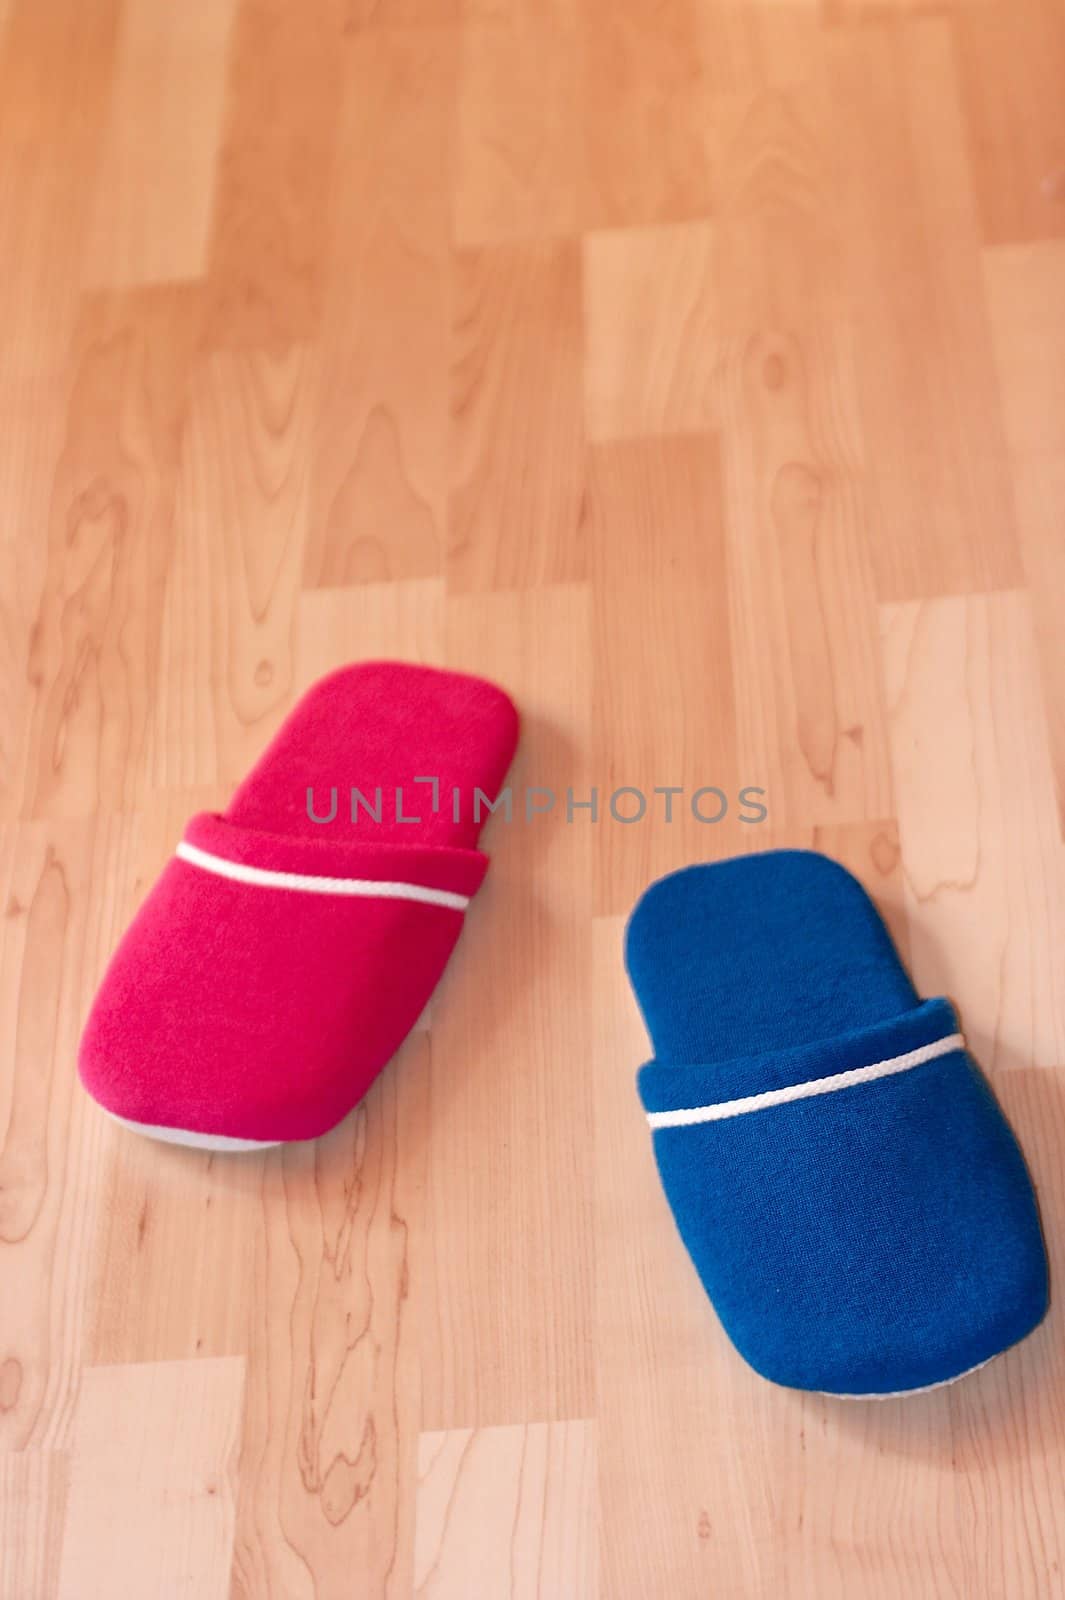 Red and blue slippers on parquet